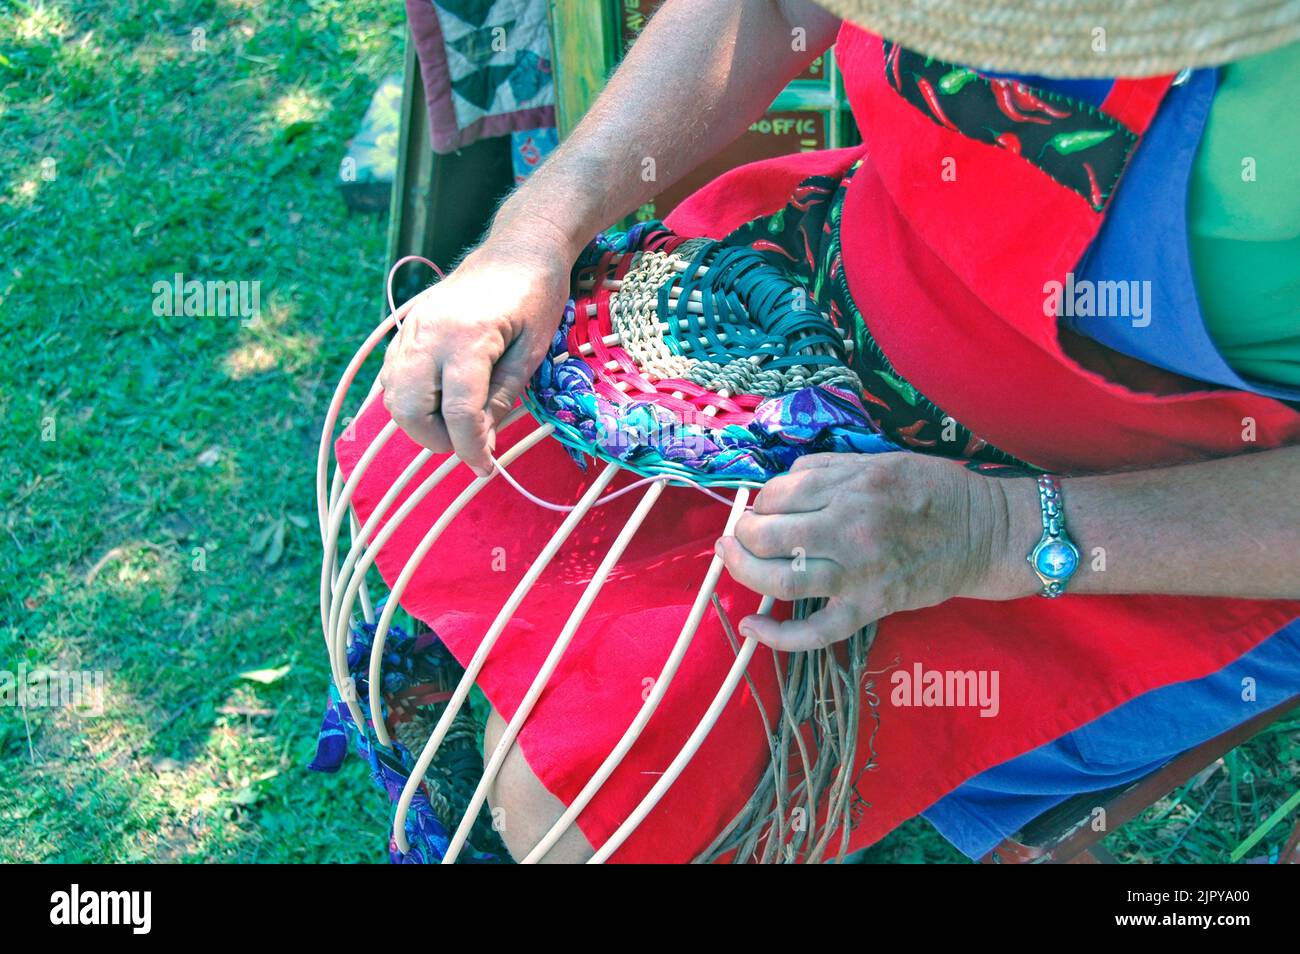 Hands working at an arts and crafts show making crafts and art weaving for sale Stock Photo